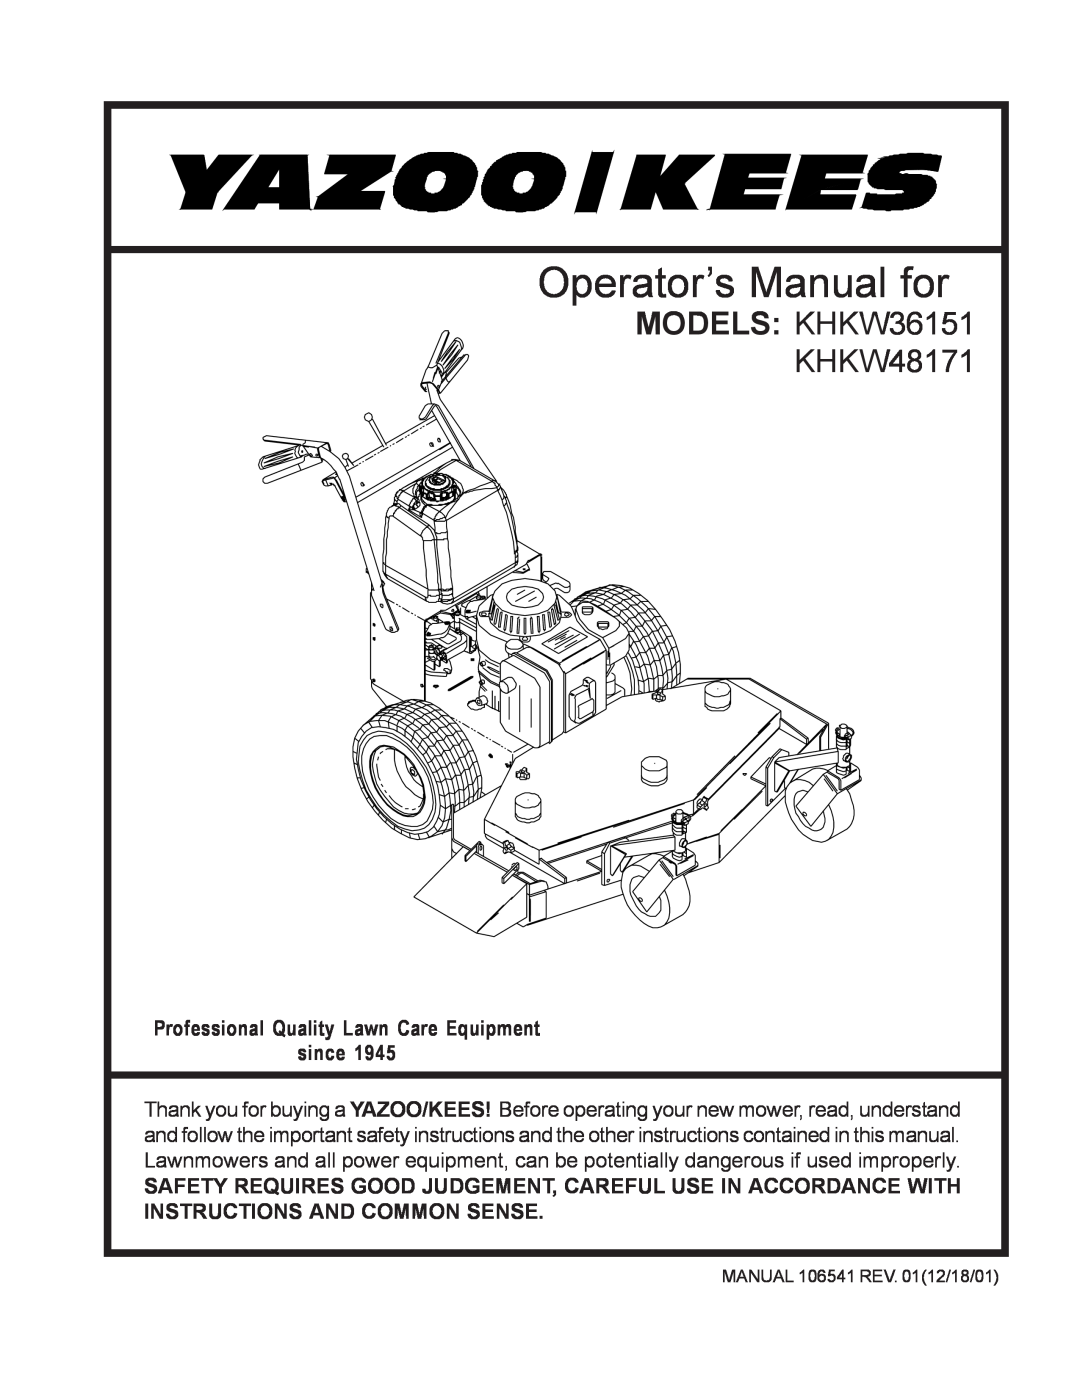 Yazoo/Kees KHKW36151, KHKW48171 important safety instructions Professional Quality Lawn Care Equipment since 